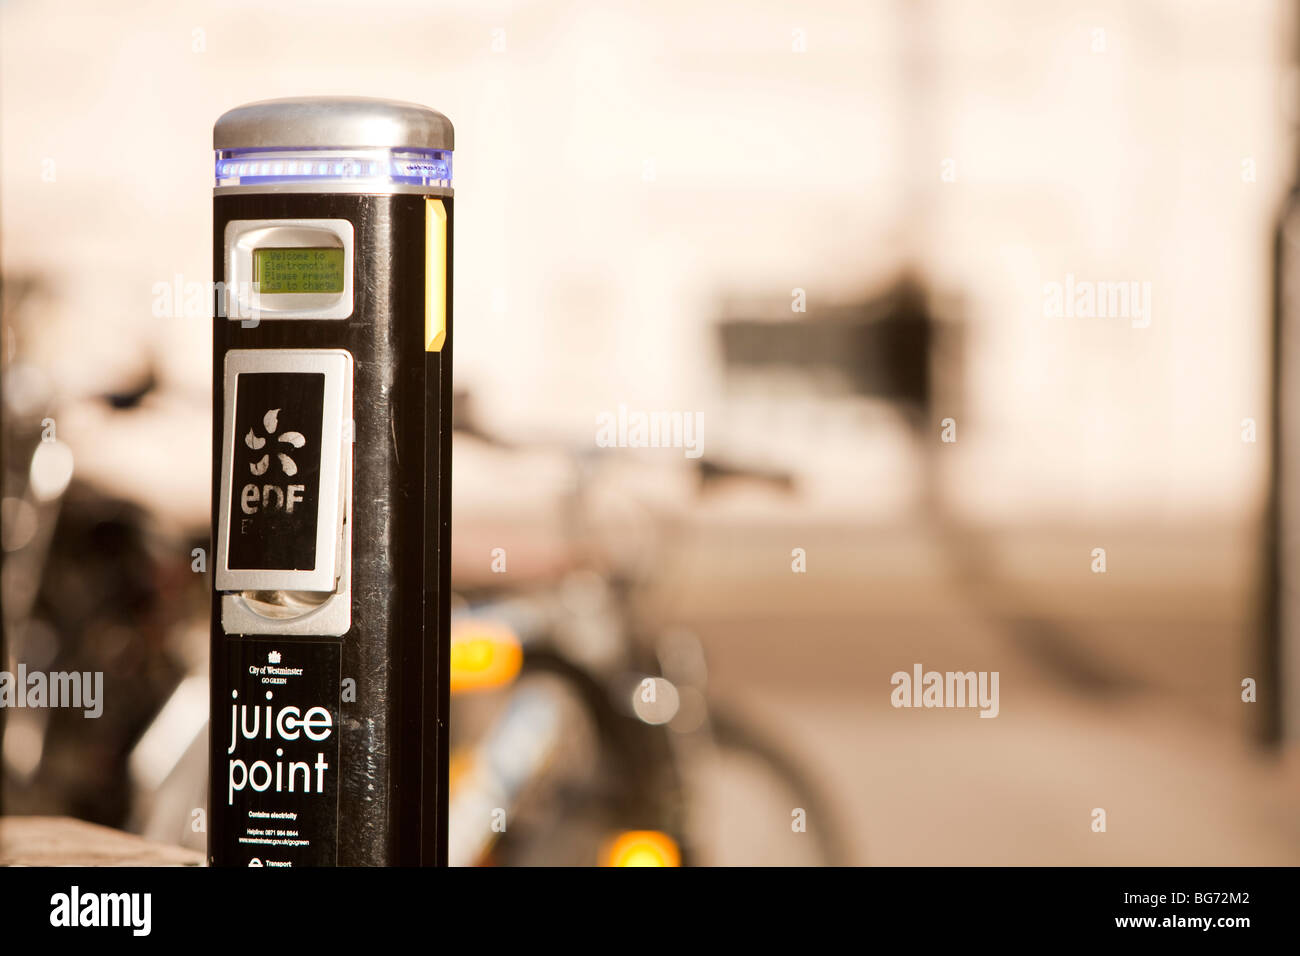 An electric vehicle re charging Juice Point in Westminster, london, UK. Stock Photo